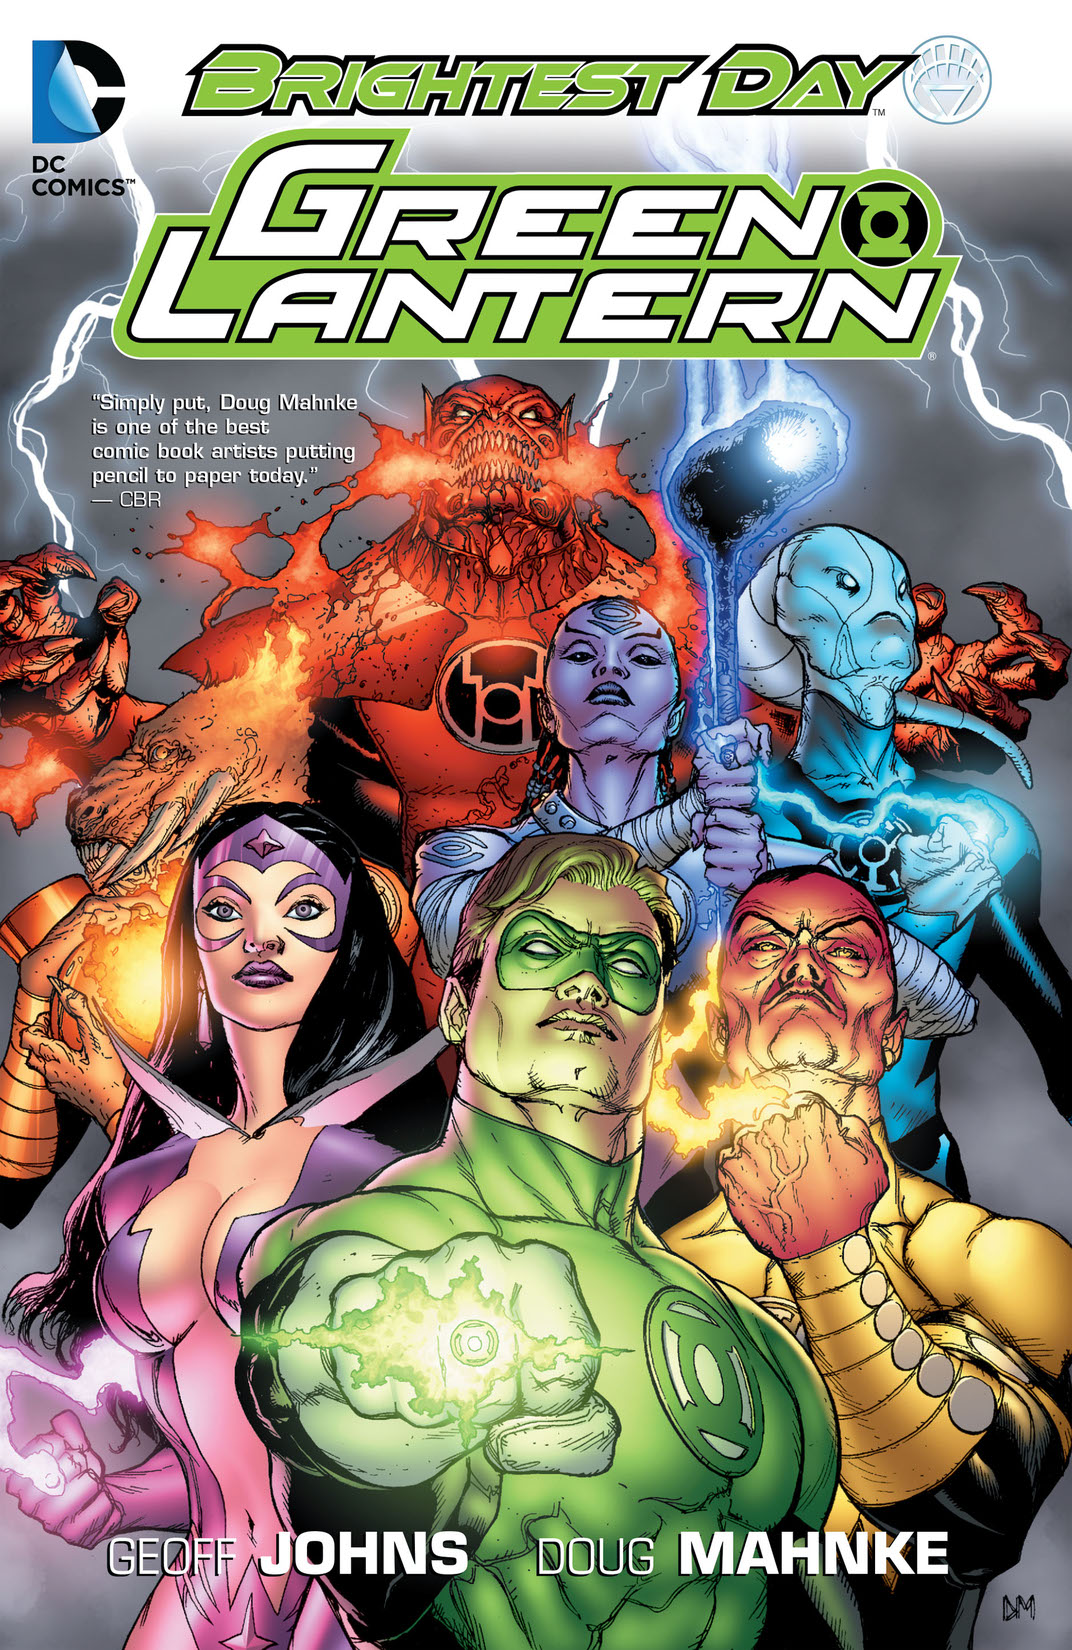 Green Lantern: Brightest Day preview images